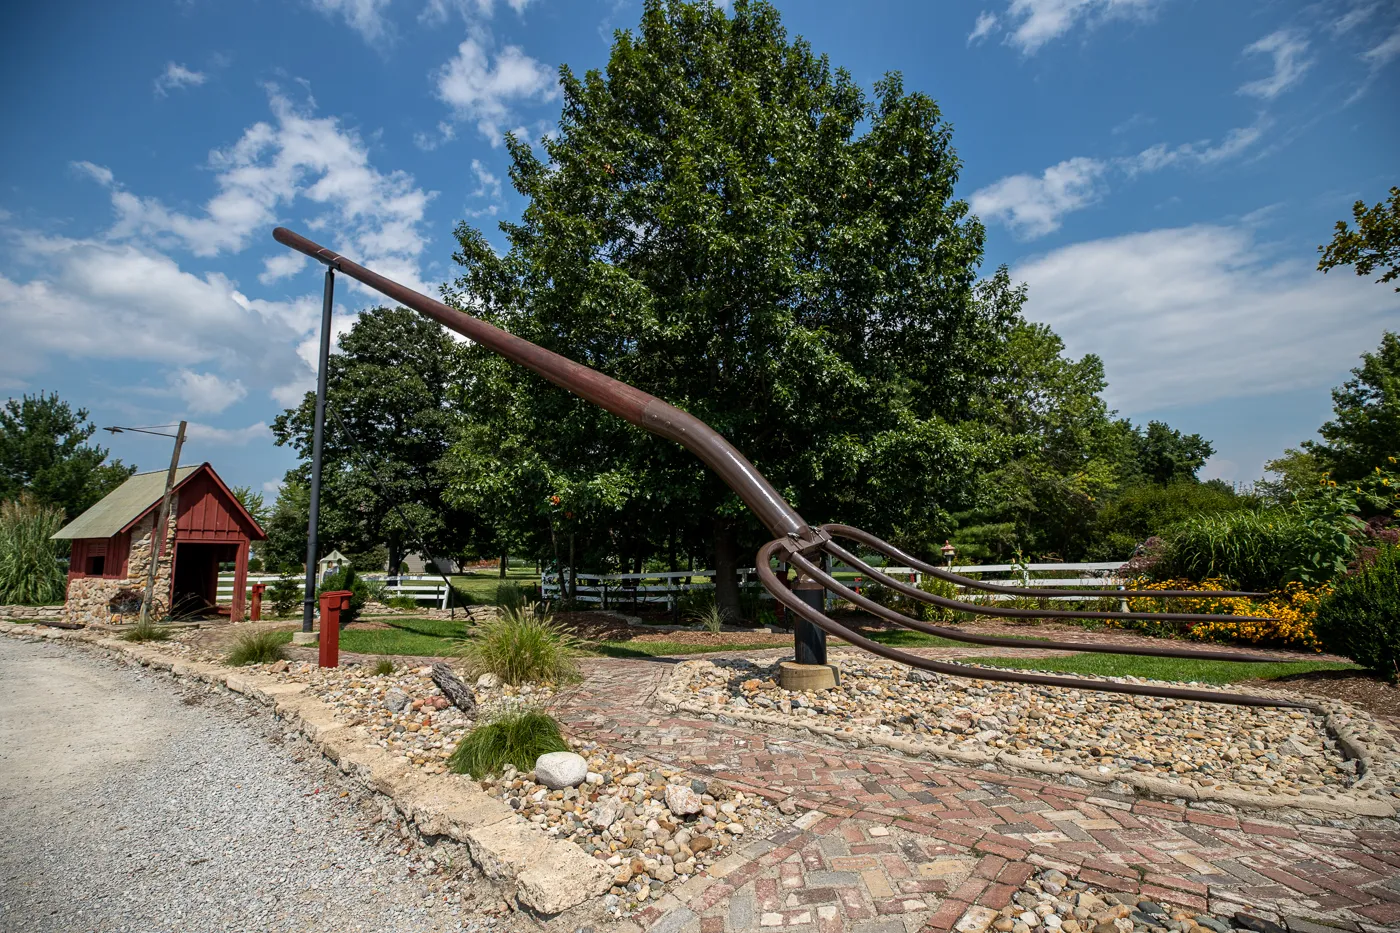 The world's largest pitchfork in Casey, Illinois